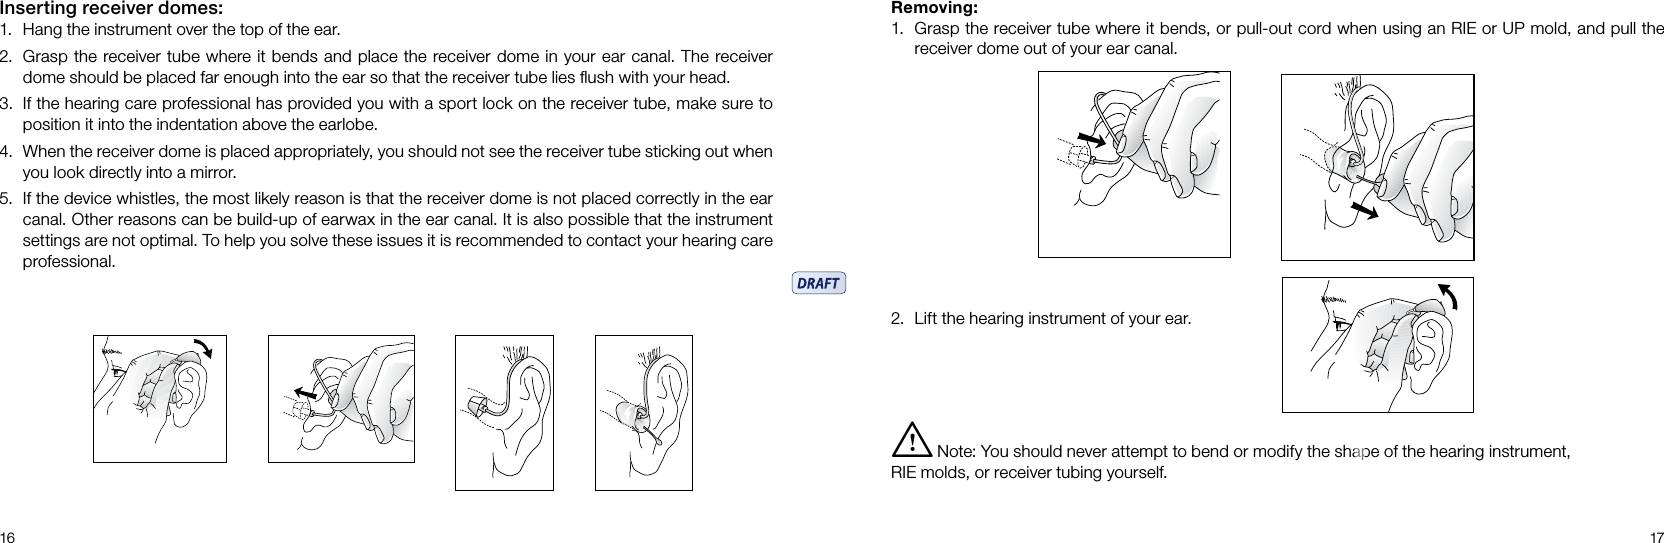 16 17Inserting receiver domes:1.  Hang the instrument over the top of the ear.2.  Grasp the receiver tube where it bends and place the receiver dome in your ear canal. The receiver dome should be placed far enough into the ear so that the receiver tube lies ﬂush with your head.3.  If the hearing care professional has provided you with a sport lock on the receiver tube, make sure to position it into the indentation above the earlobe.4.  When the receiver dome is placed appropriately, you should not see the receiver tube sticking out when you look directly into a mirror.5.  If the device whistles, the most likely reason is that the receiver dome is not placed correctly in the ear canal. Other reasons can be build-up of earwax in the ear canal. It is also possible that the instrument settings are not optimal. To help you solve these issues it is recommended to contact your hearing care professional.Removing:1.  Grasp the receiver tube where it bends, or pull-out cord when using an RIE or UP mold, and pull the receiver dome out of your ear canal.i  Note: You should never attempt to bend or modify the shape of the hearing instrument, RIE molds, or receiver tubing yourself.2.  Lift the hearing instrument of your ear.